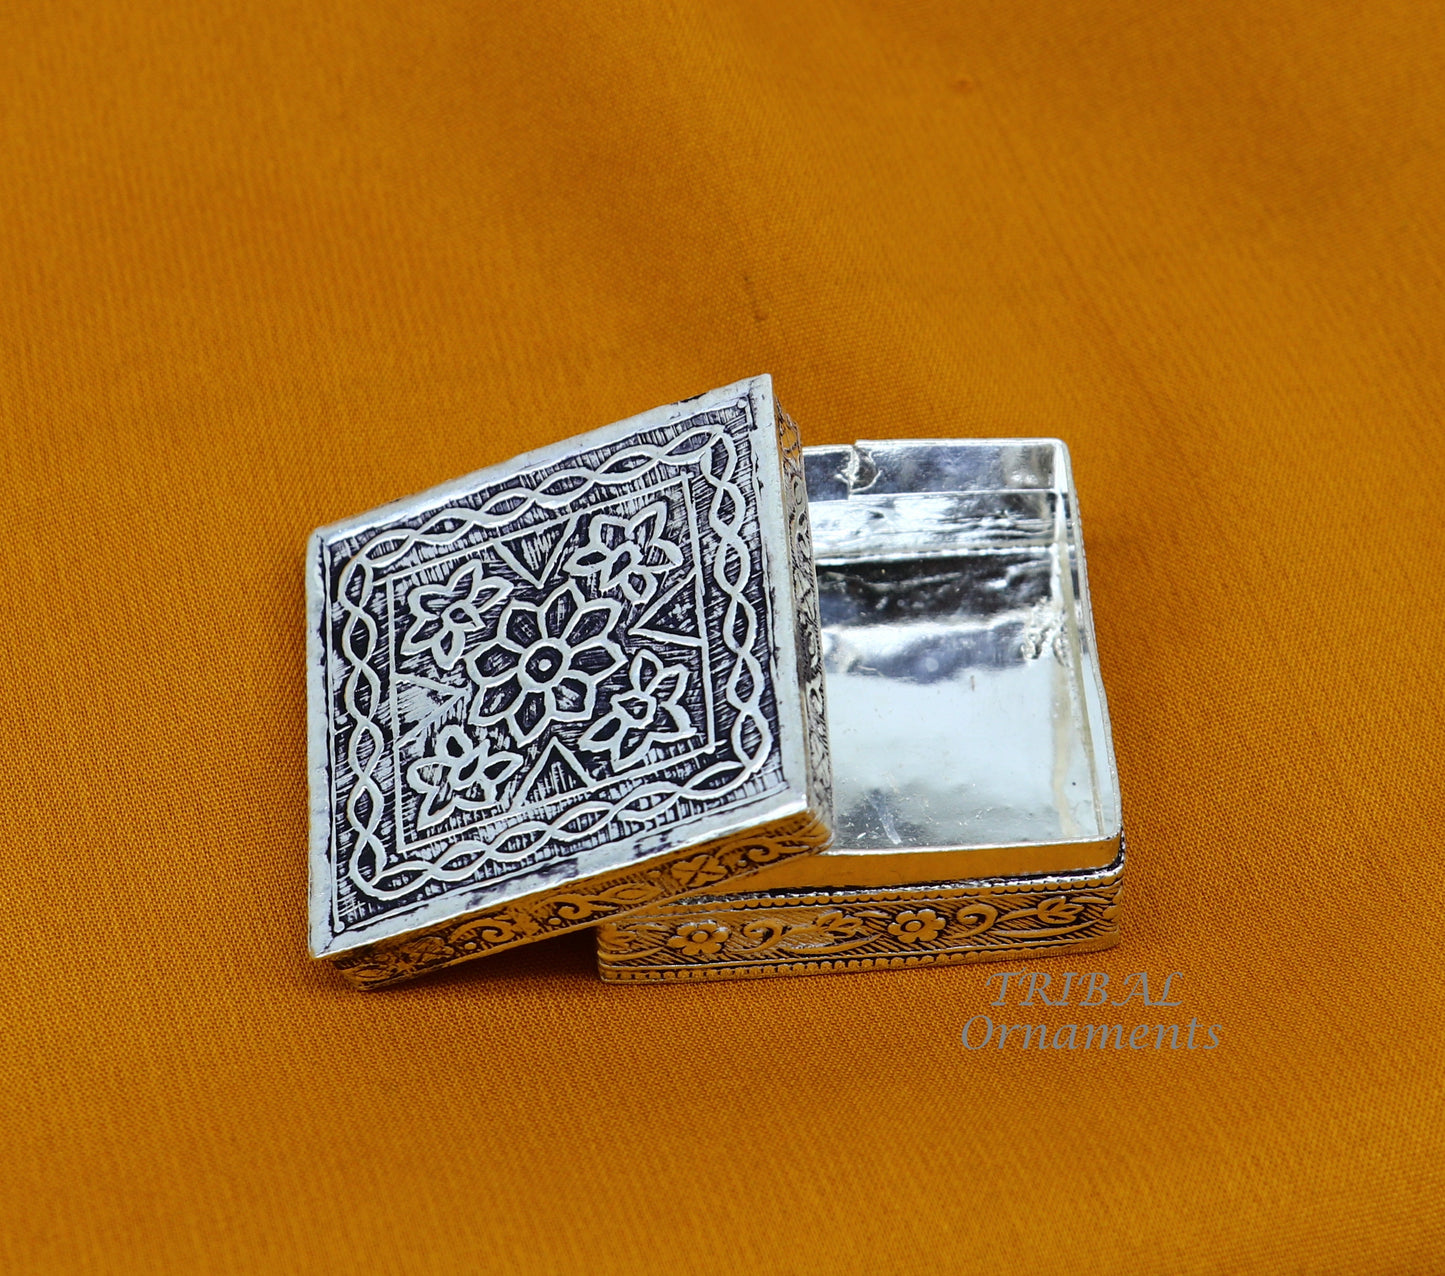 925 sterling silver trinket box, kajal box/casket box bridal square shape box collection, container box, eyeliner box gifting art stb713 - TRIBAL ORNAMENTS